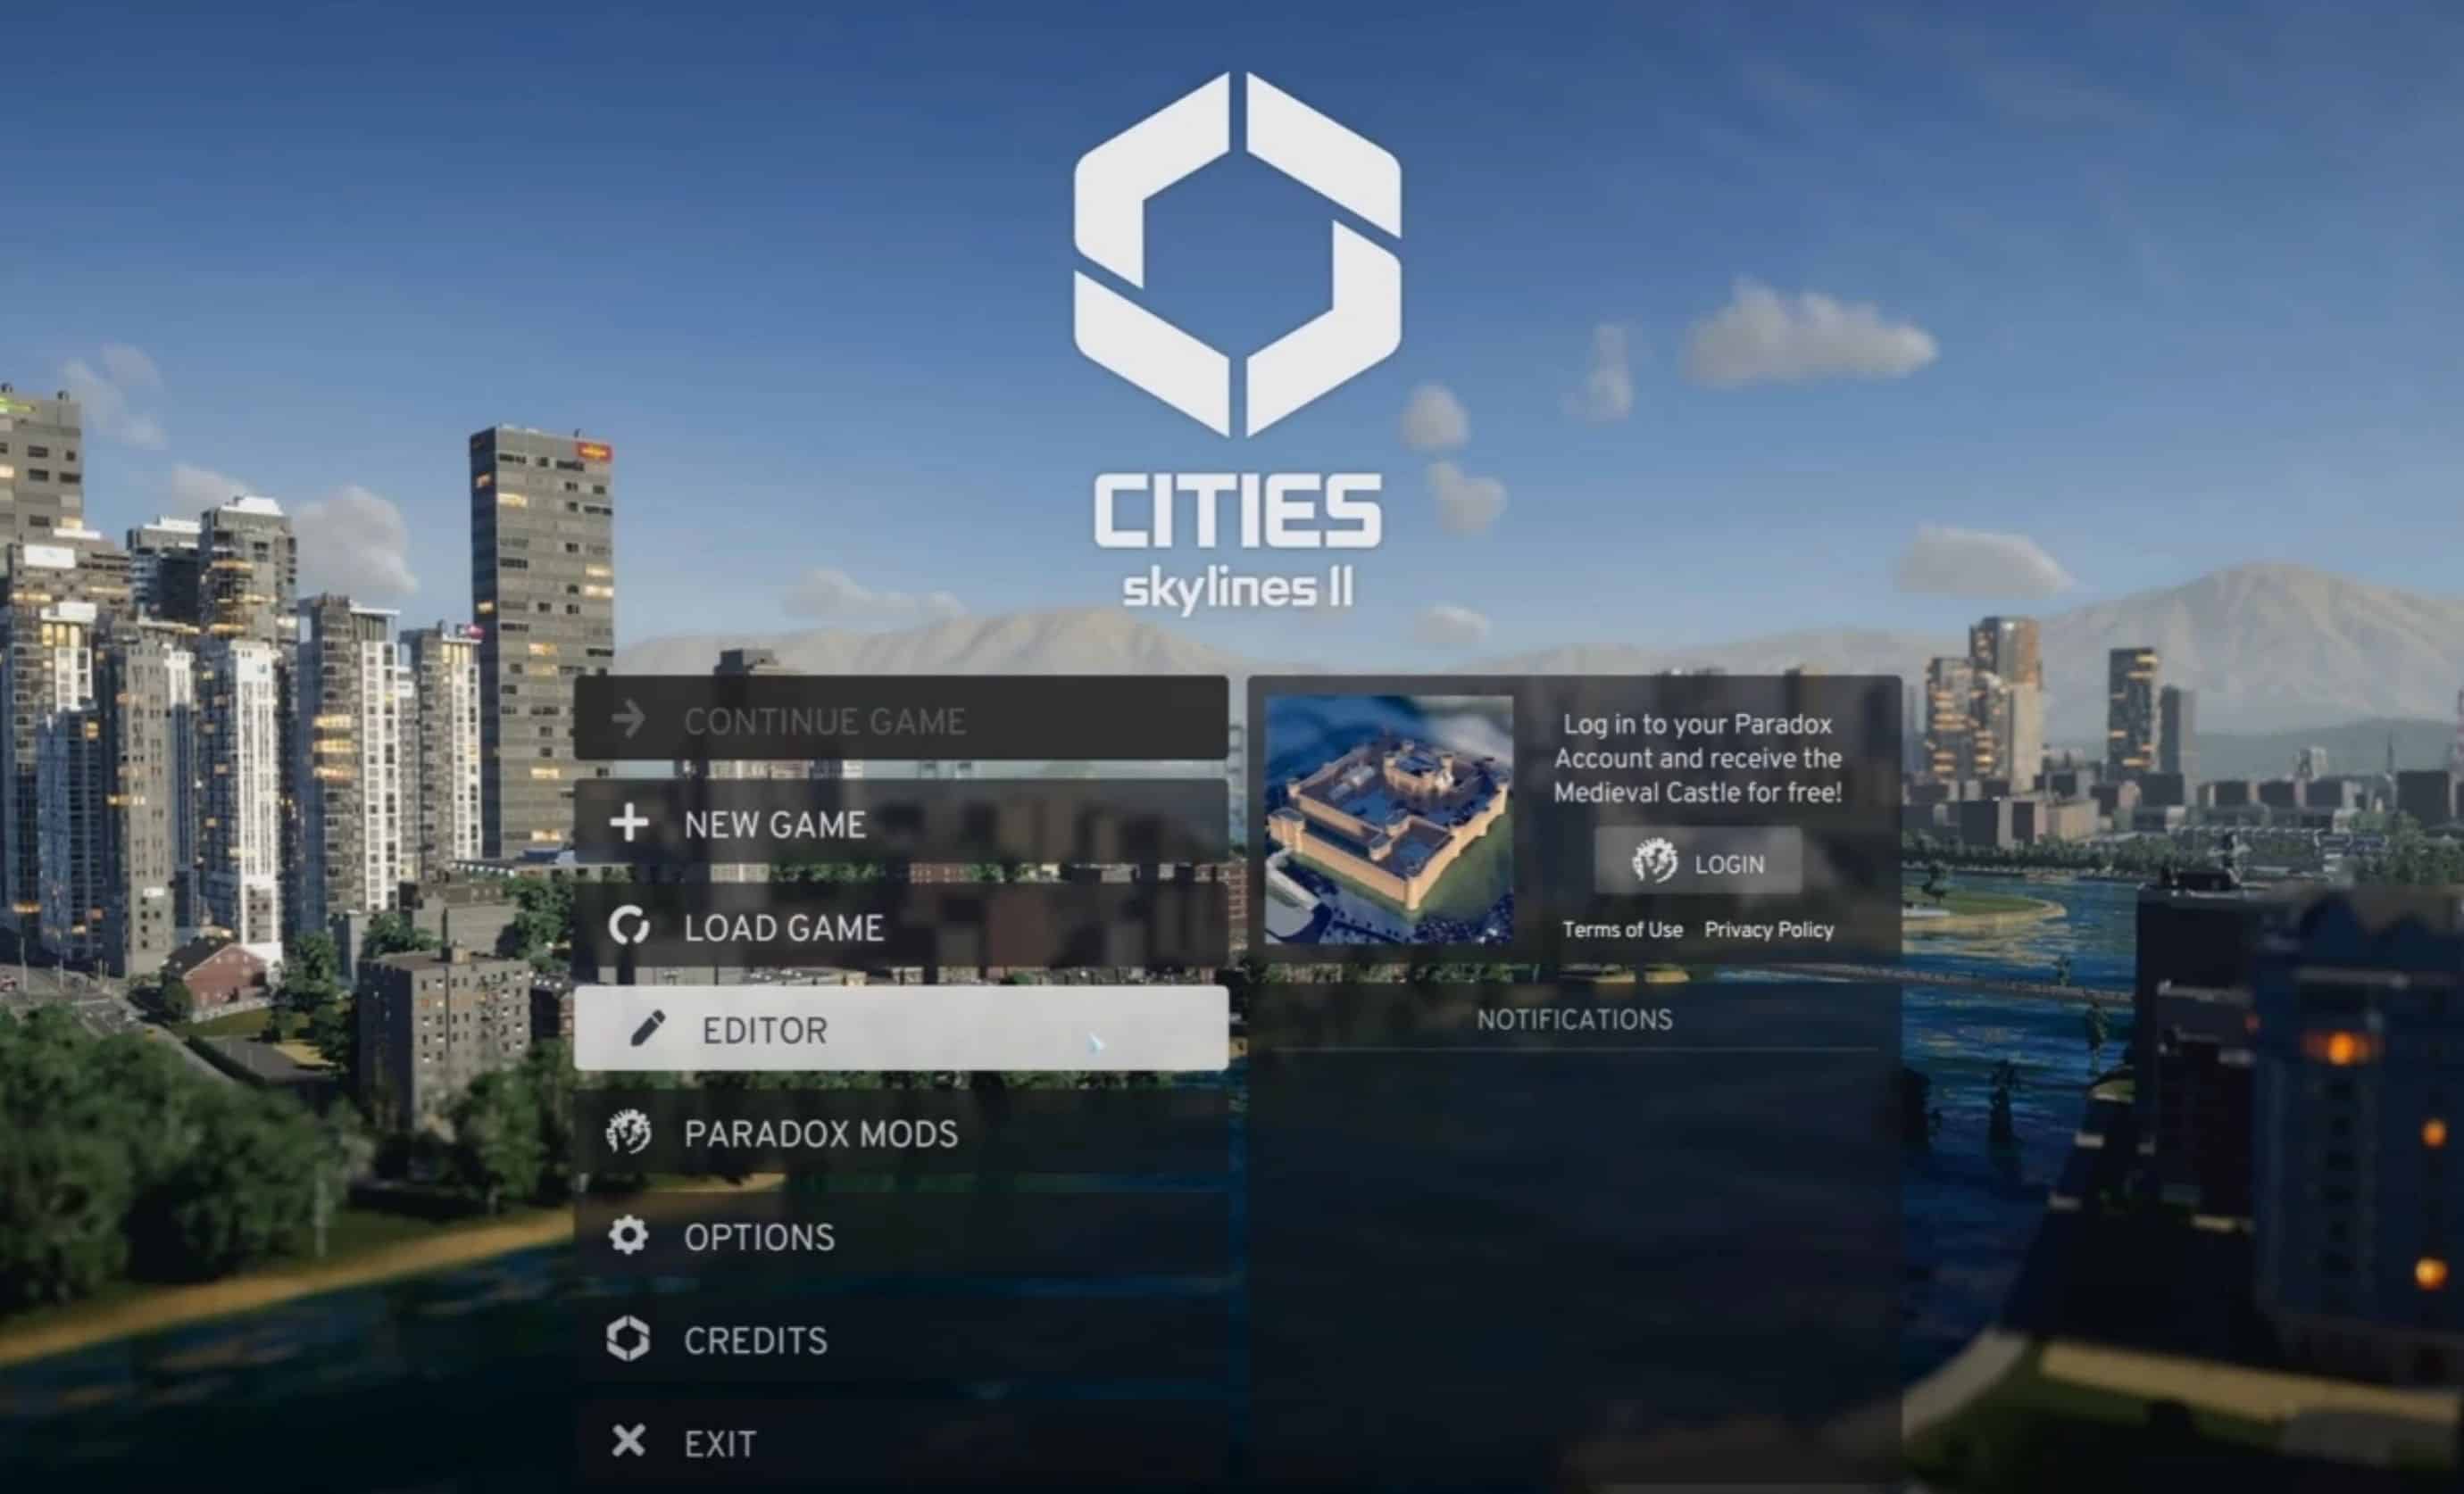 Enable Editor v1.0 | Cities: Skylines 2 Mod Download